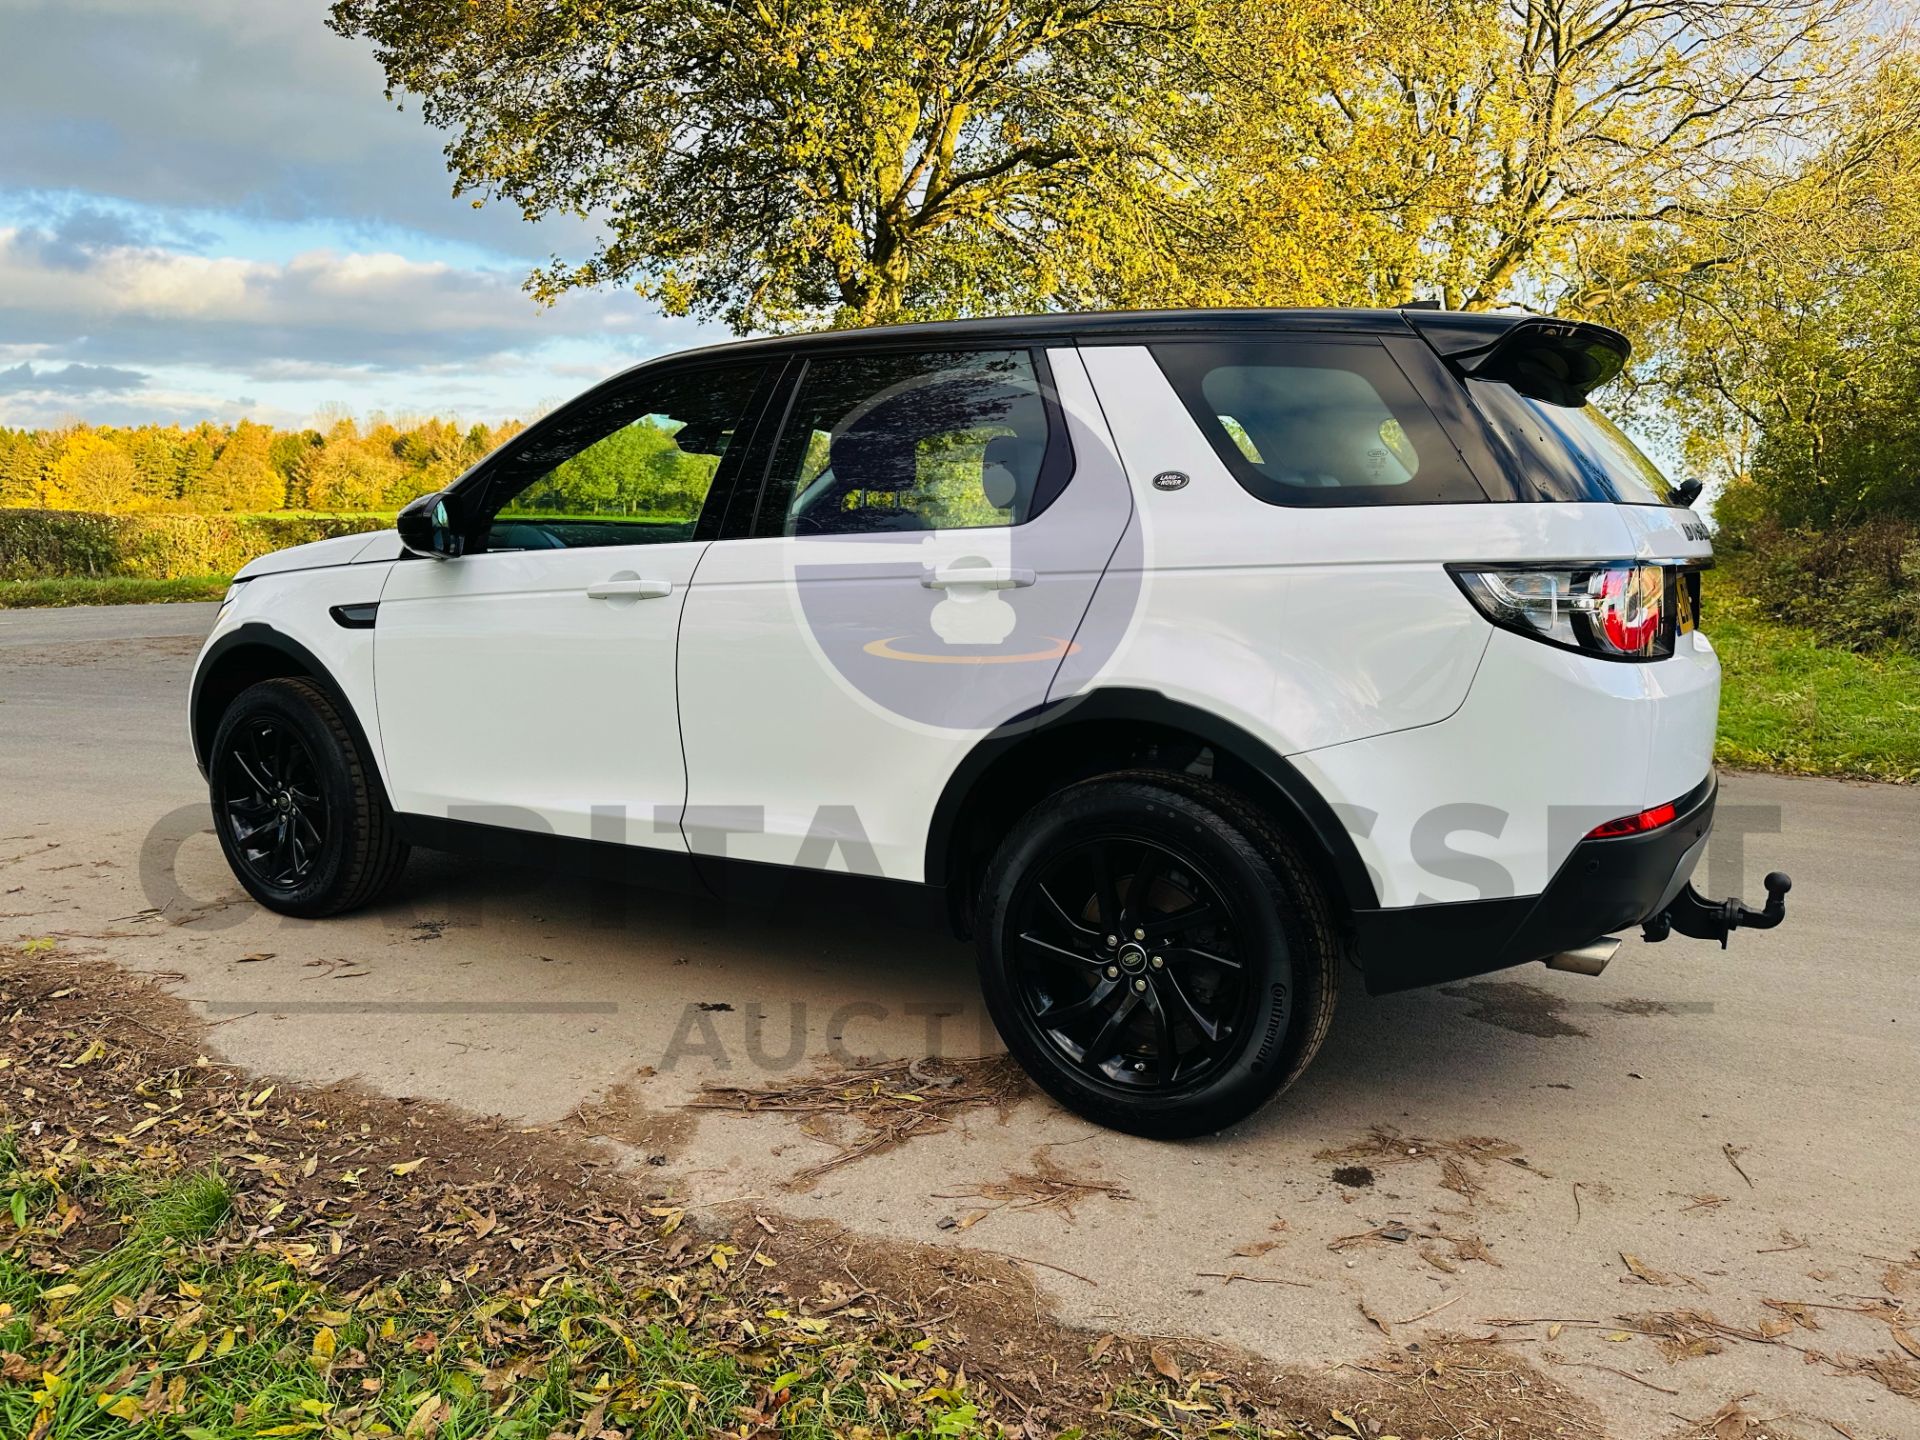 (On Sale) LAND ROVER DISCOVERY SPORT *SE* 5 DOOR SUV (2019 - EURO 6) 2.0 ED4 - AUTO STOP/START - Image 9 of 38